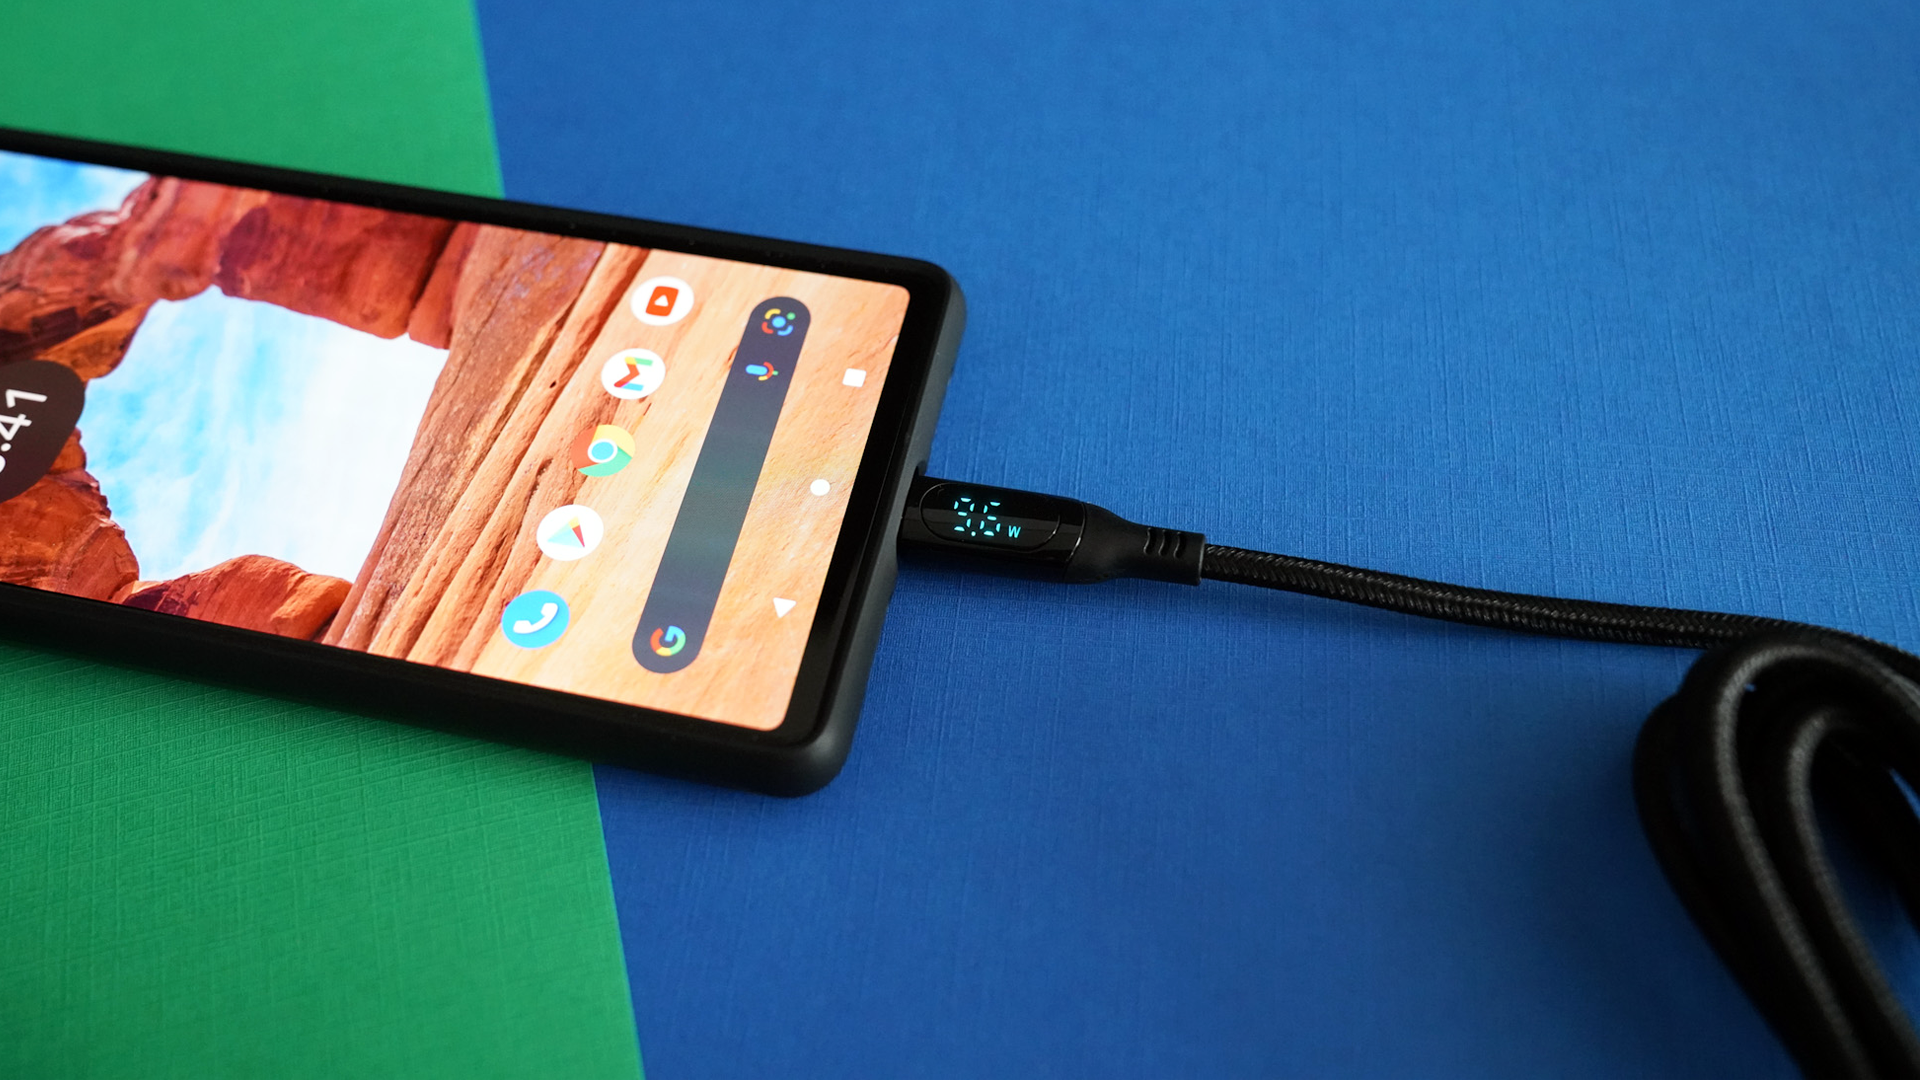 The Chipofy cable plugged into a smartphone showing a wattage reading